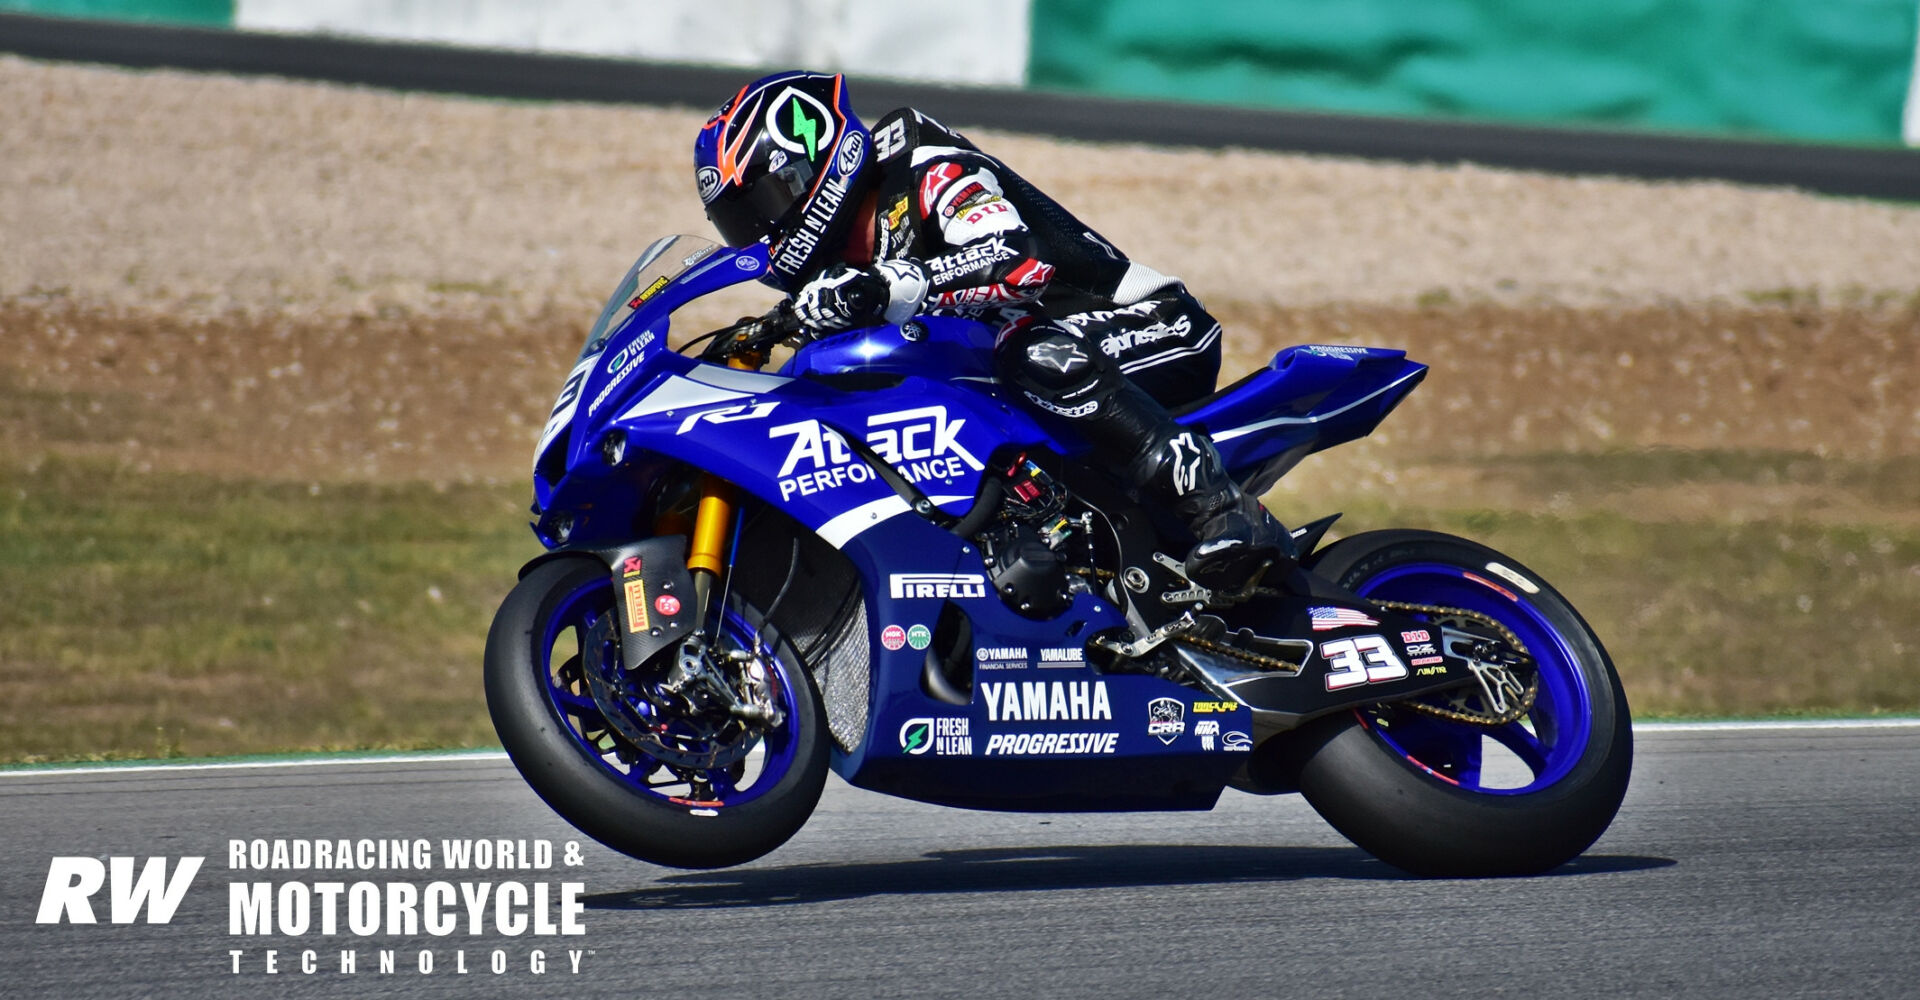 Two-time MotoAmerica Superbike Champion Jake Gagne (33) returned to Portimao, Portugal, where he finished 13th and 12th in 2018 aboard a factory Honda CBR1000RR, as a wild card with the Attack Racing Yamaha team. Photo by Michael Gougis.